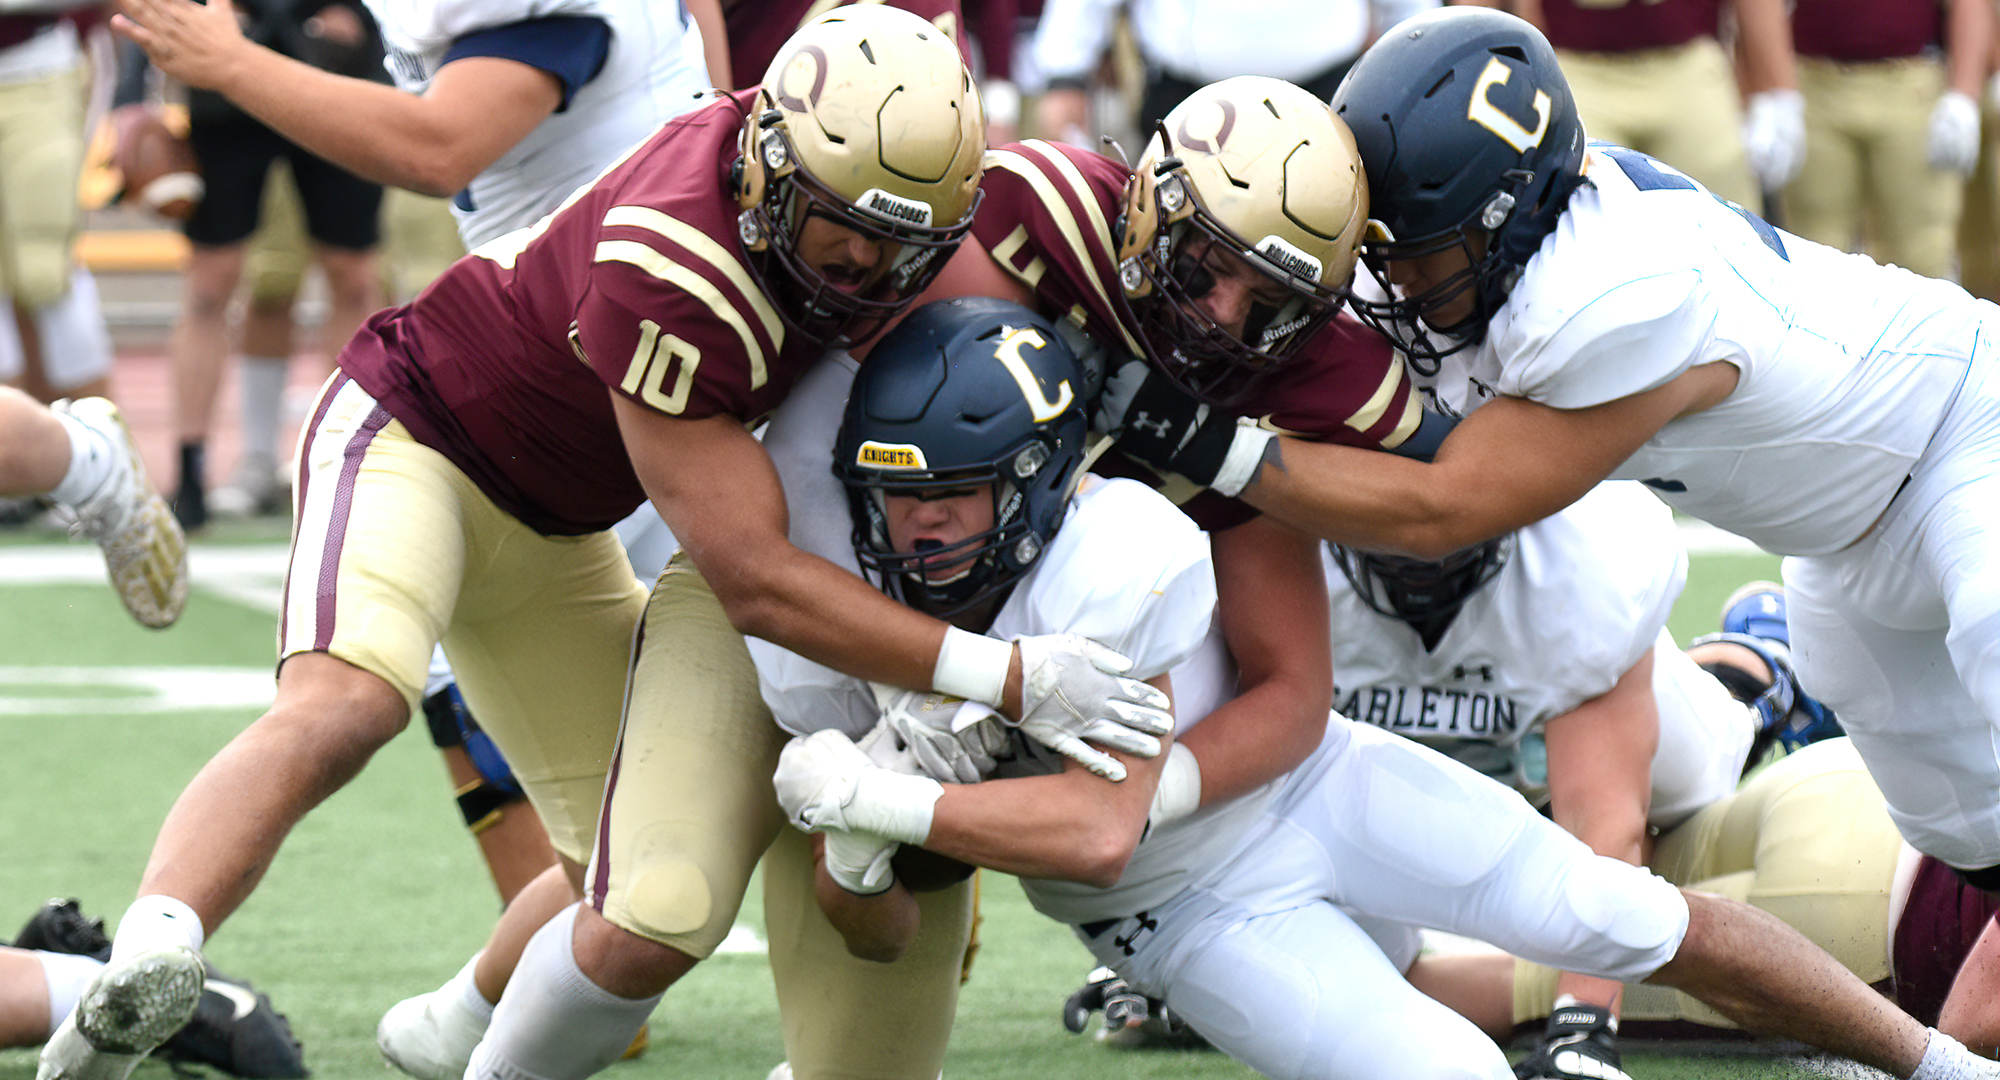 Ty Moser (#10) and Noah Jenson led the Cobber defense in their game against Carleton. The pair of seniors combined for 24 tackles.